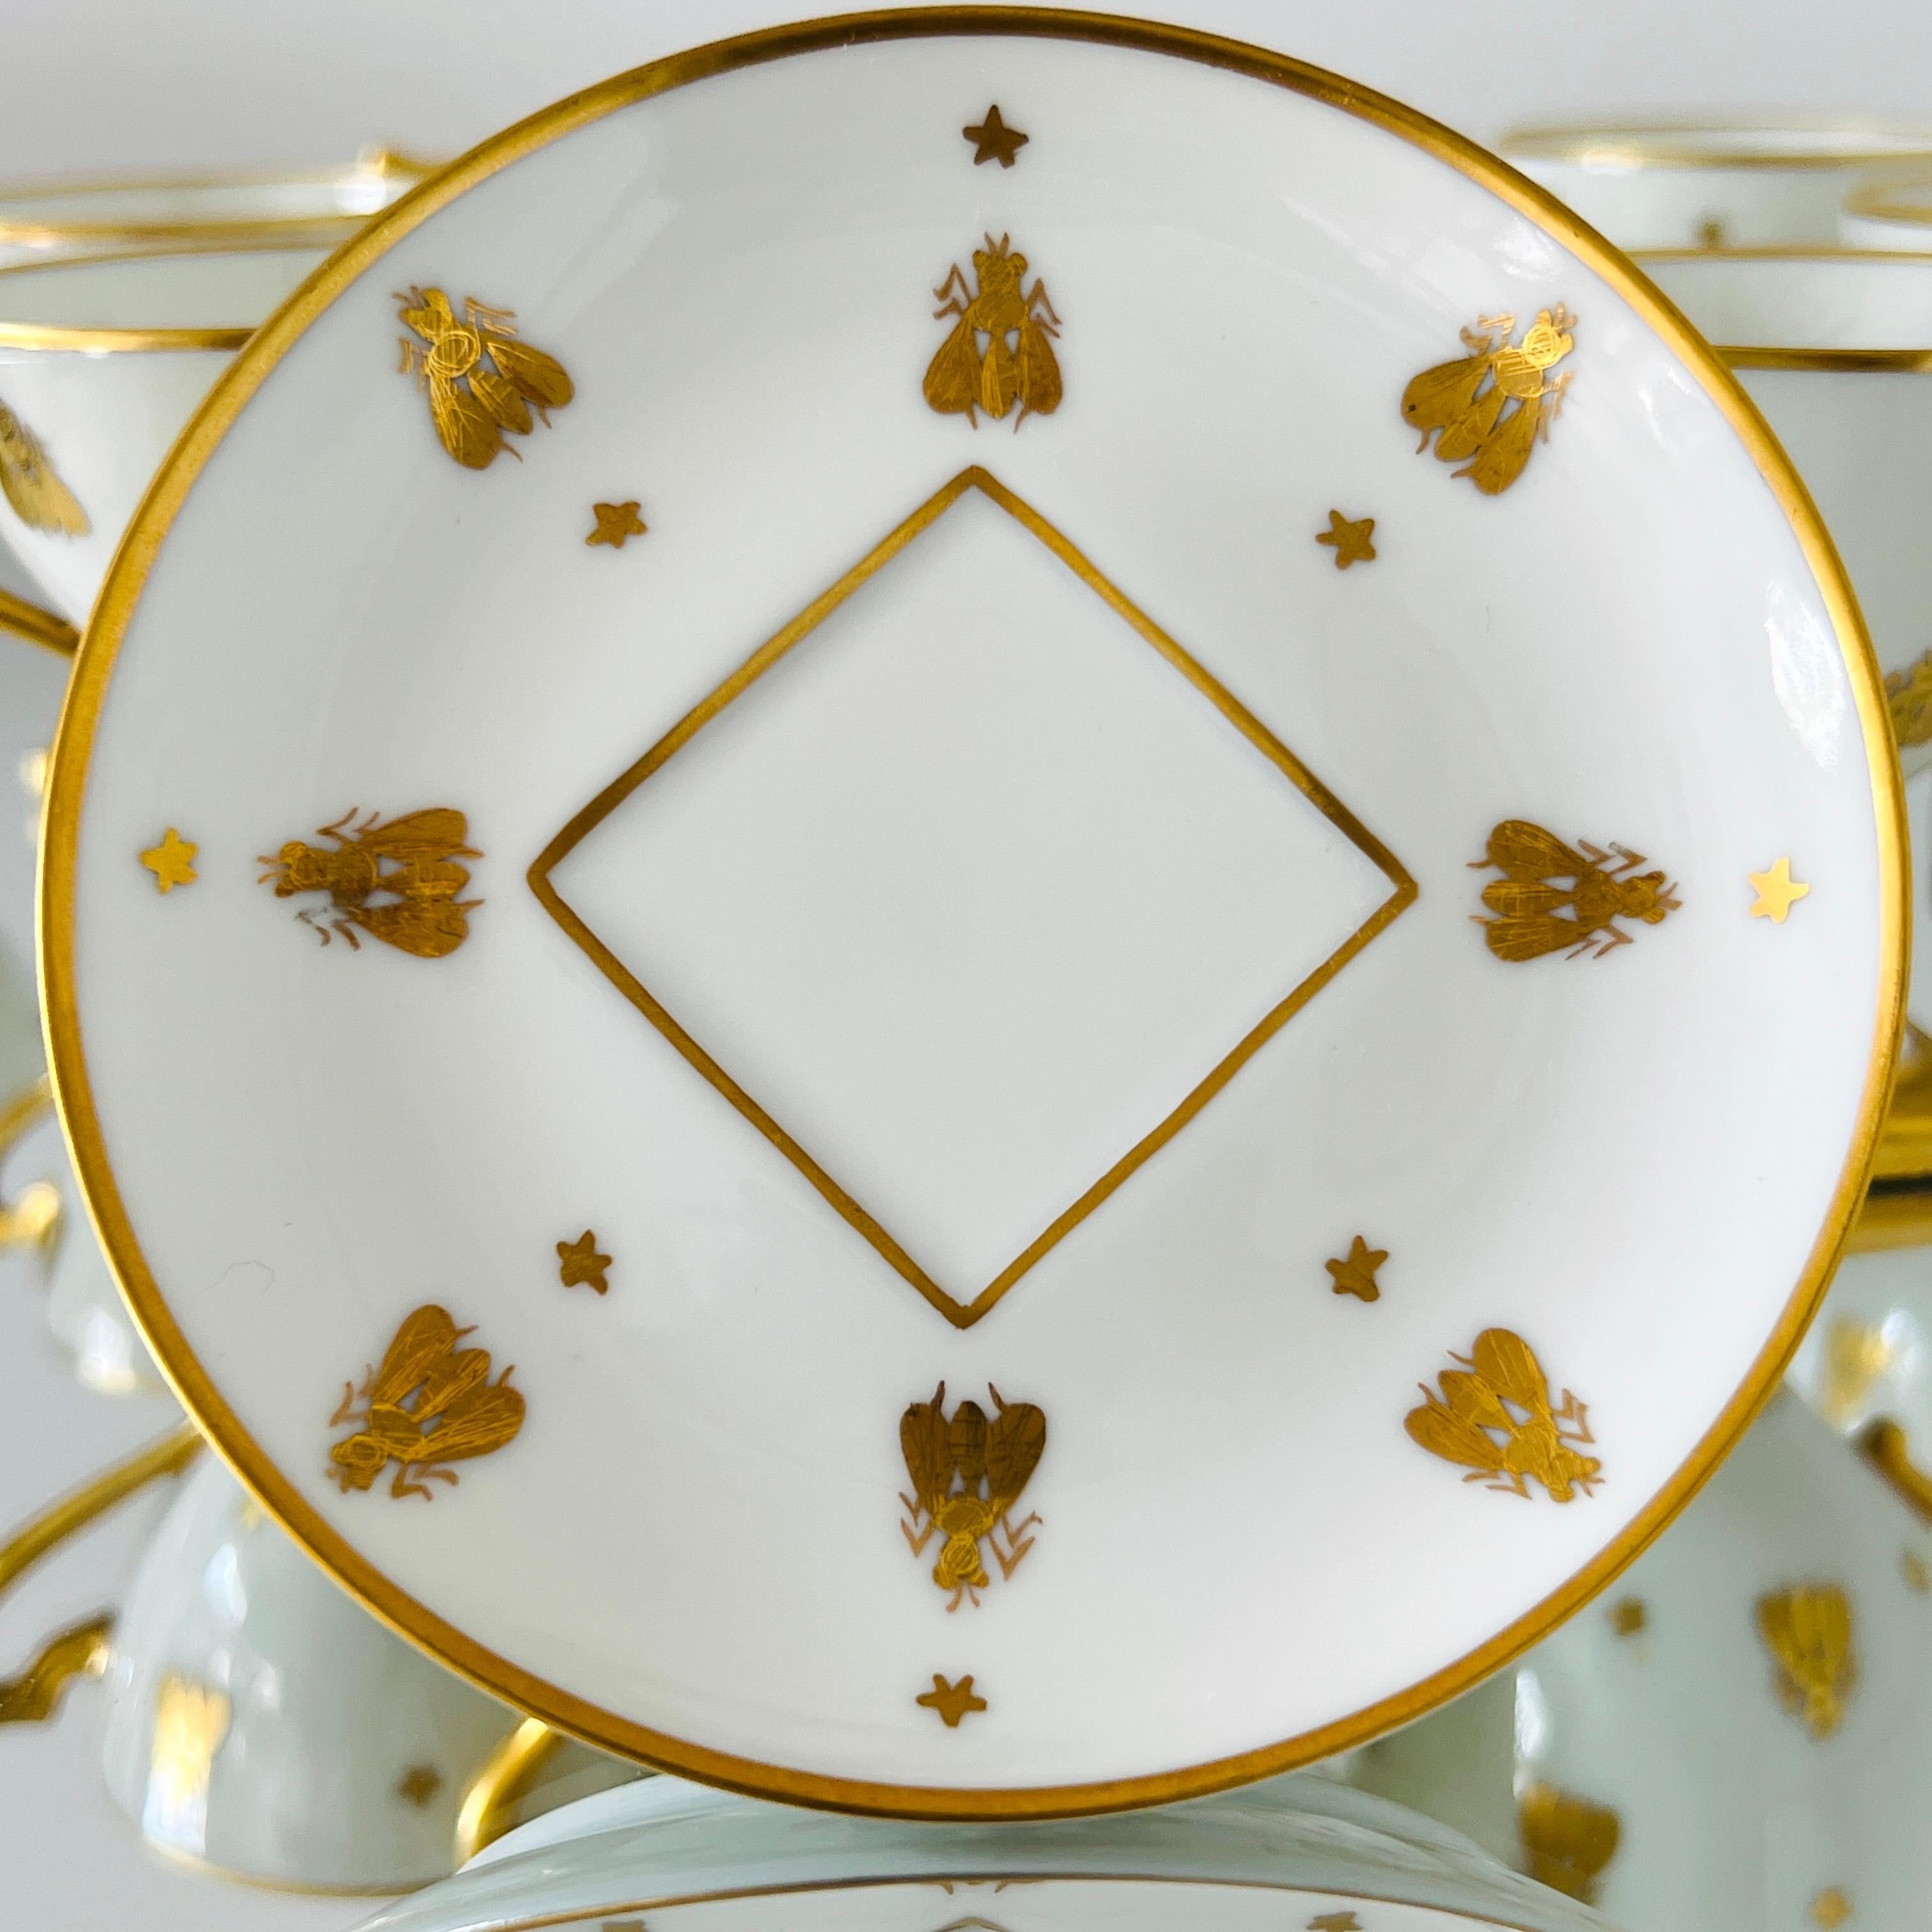 Le Tallec Golden Bees Porcelain Demitasse Cups and Saucers, circa 1957 Set/11-12 In Good Condition For Sale In Fort Lauderdale, FL